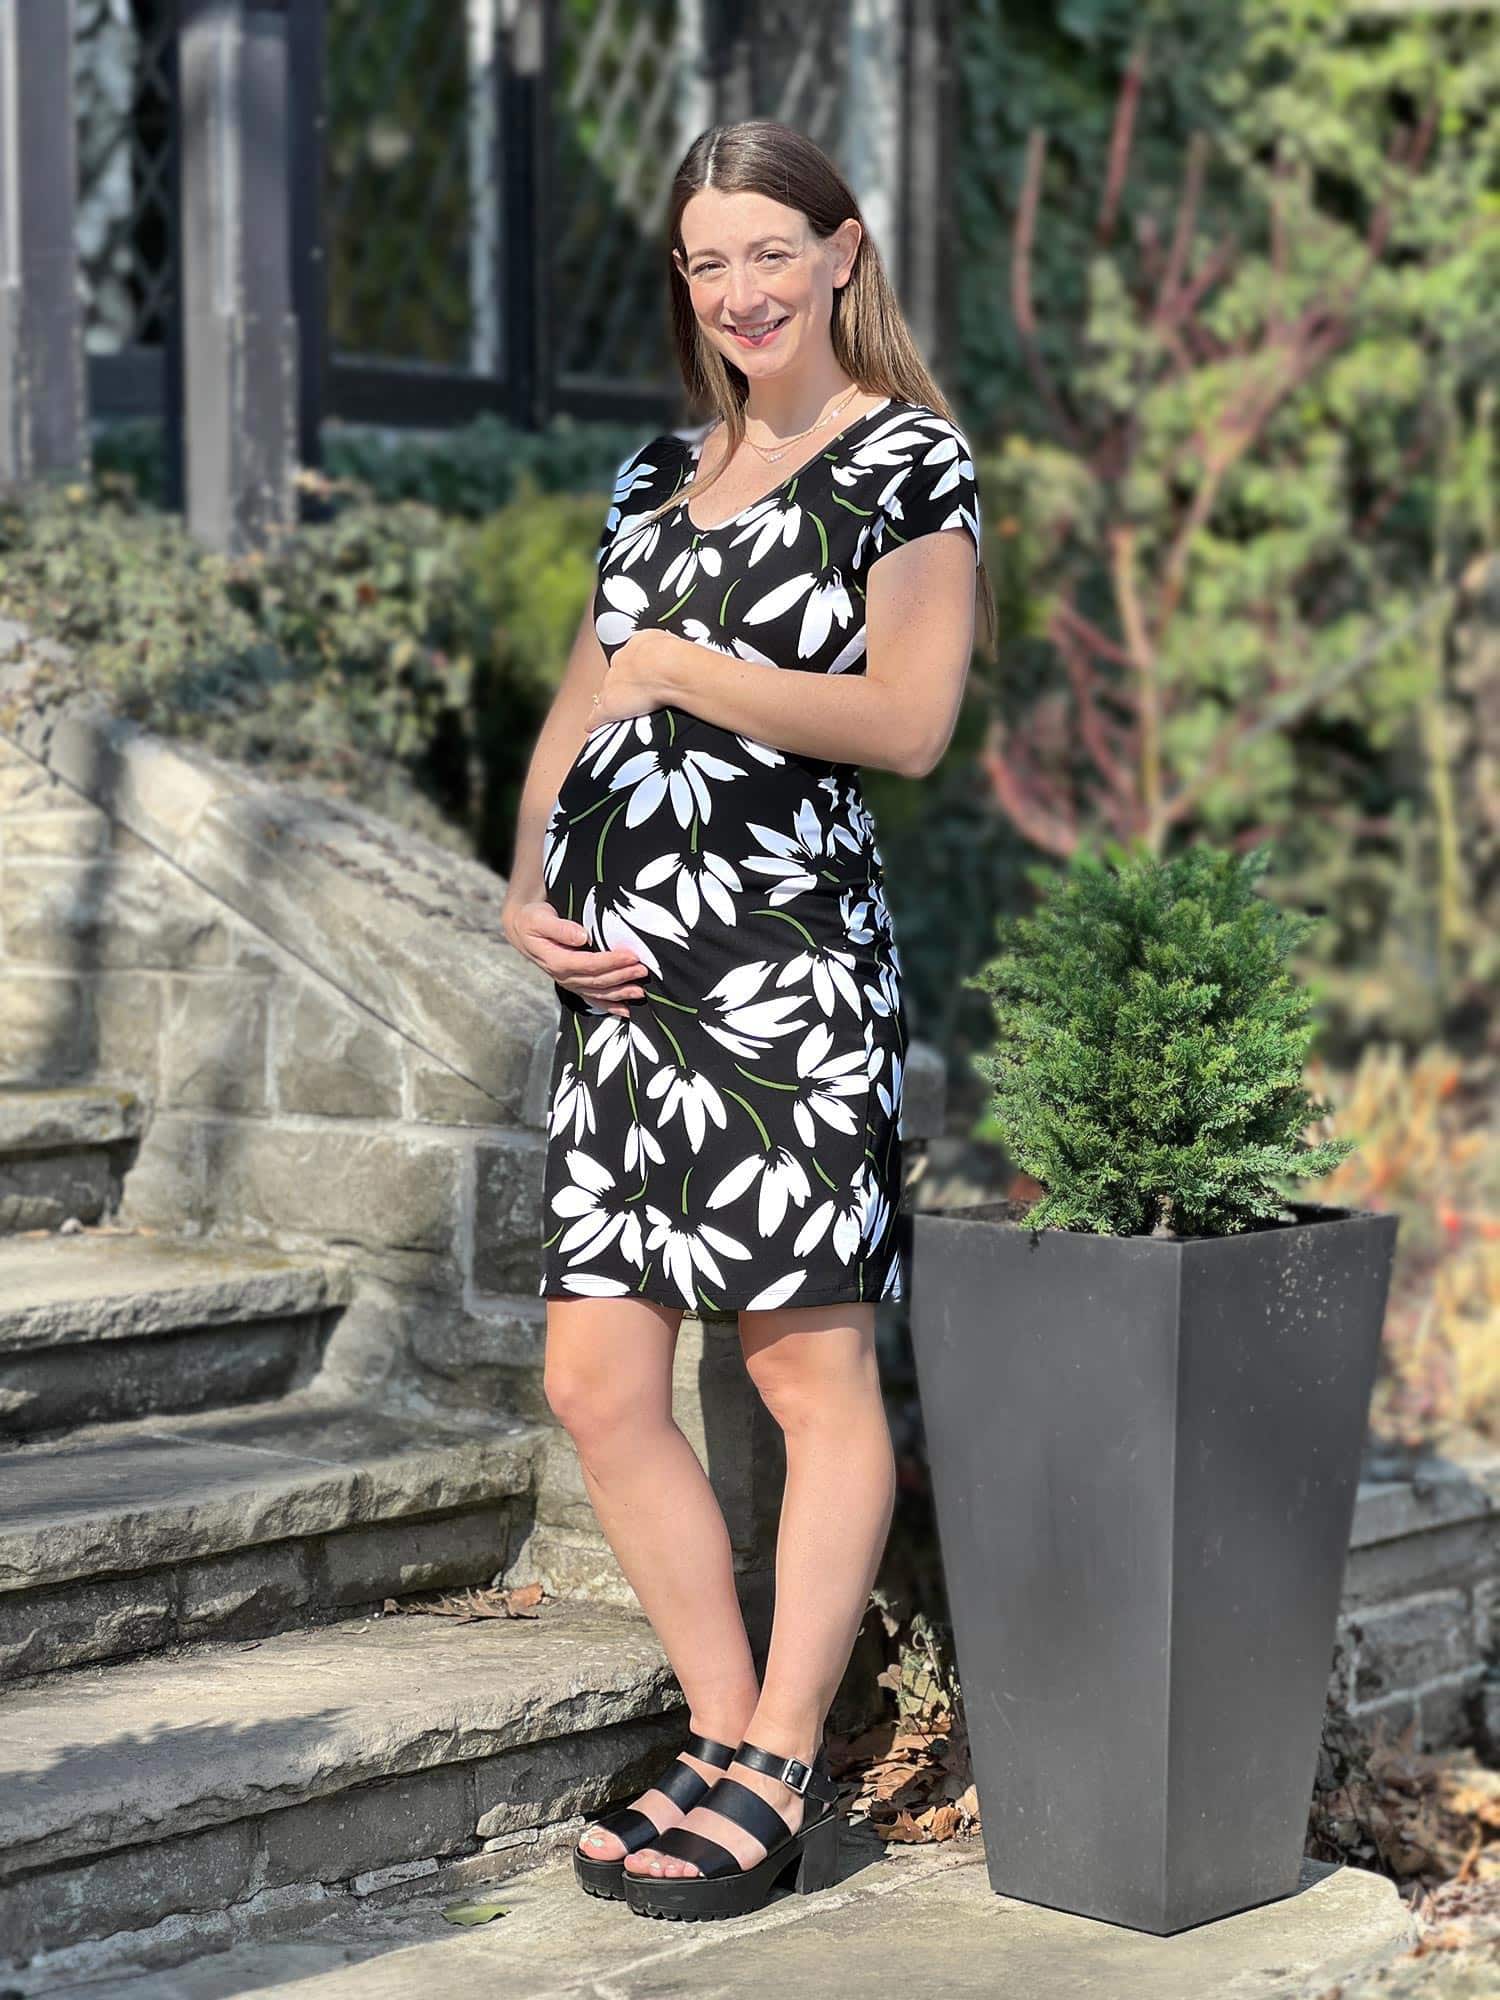 Pregnant woman wearing Miik's Sofia reversible everyday dress in floral print